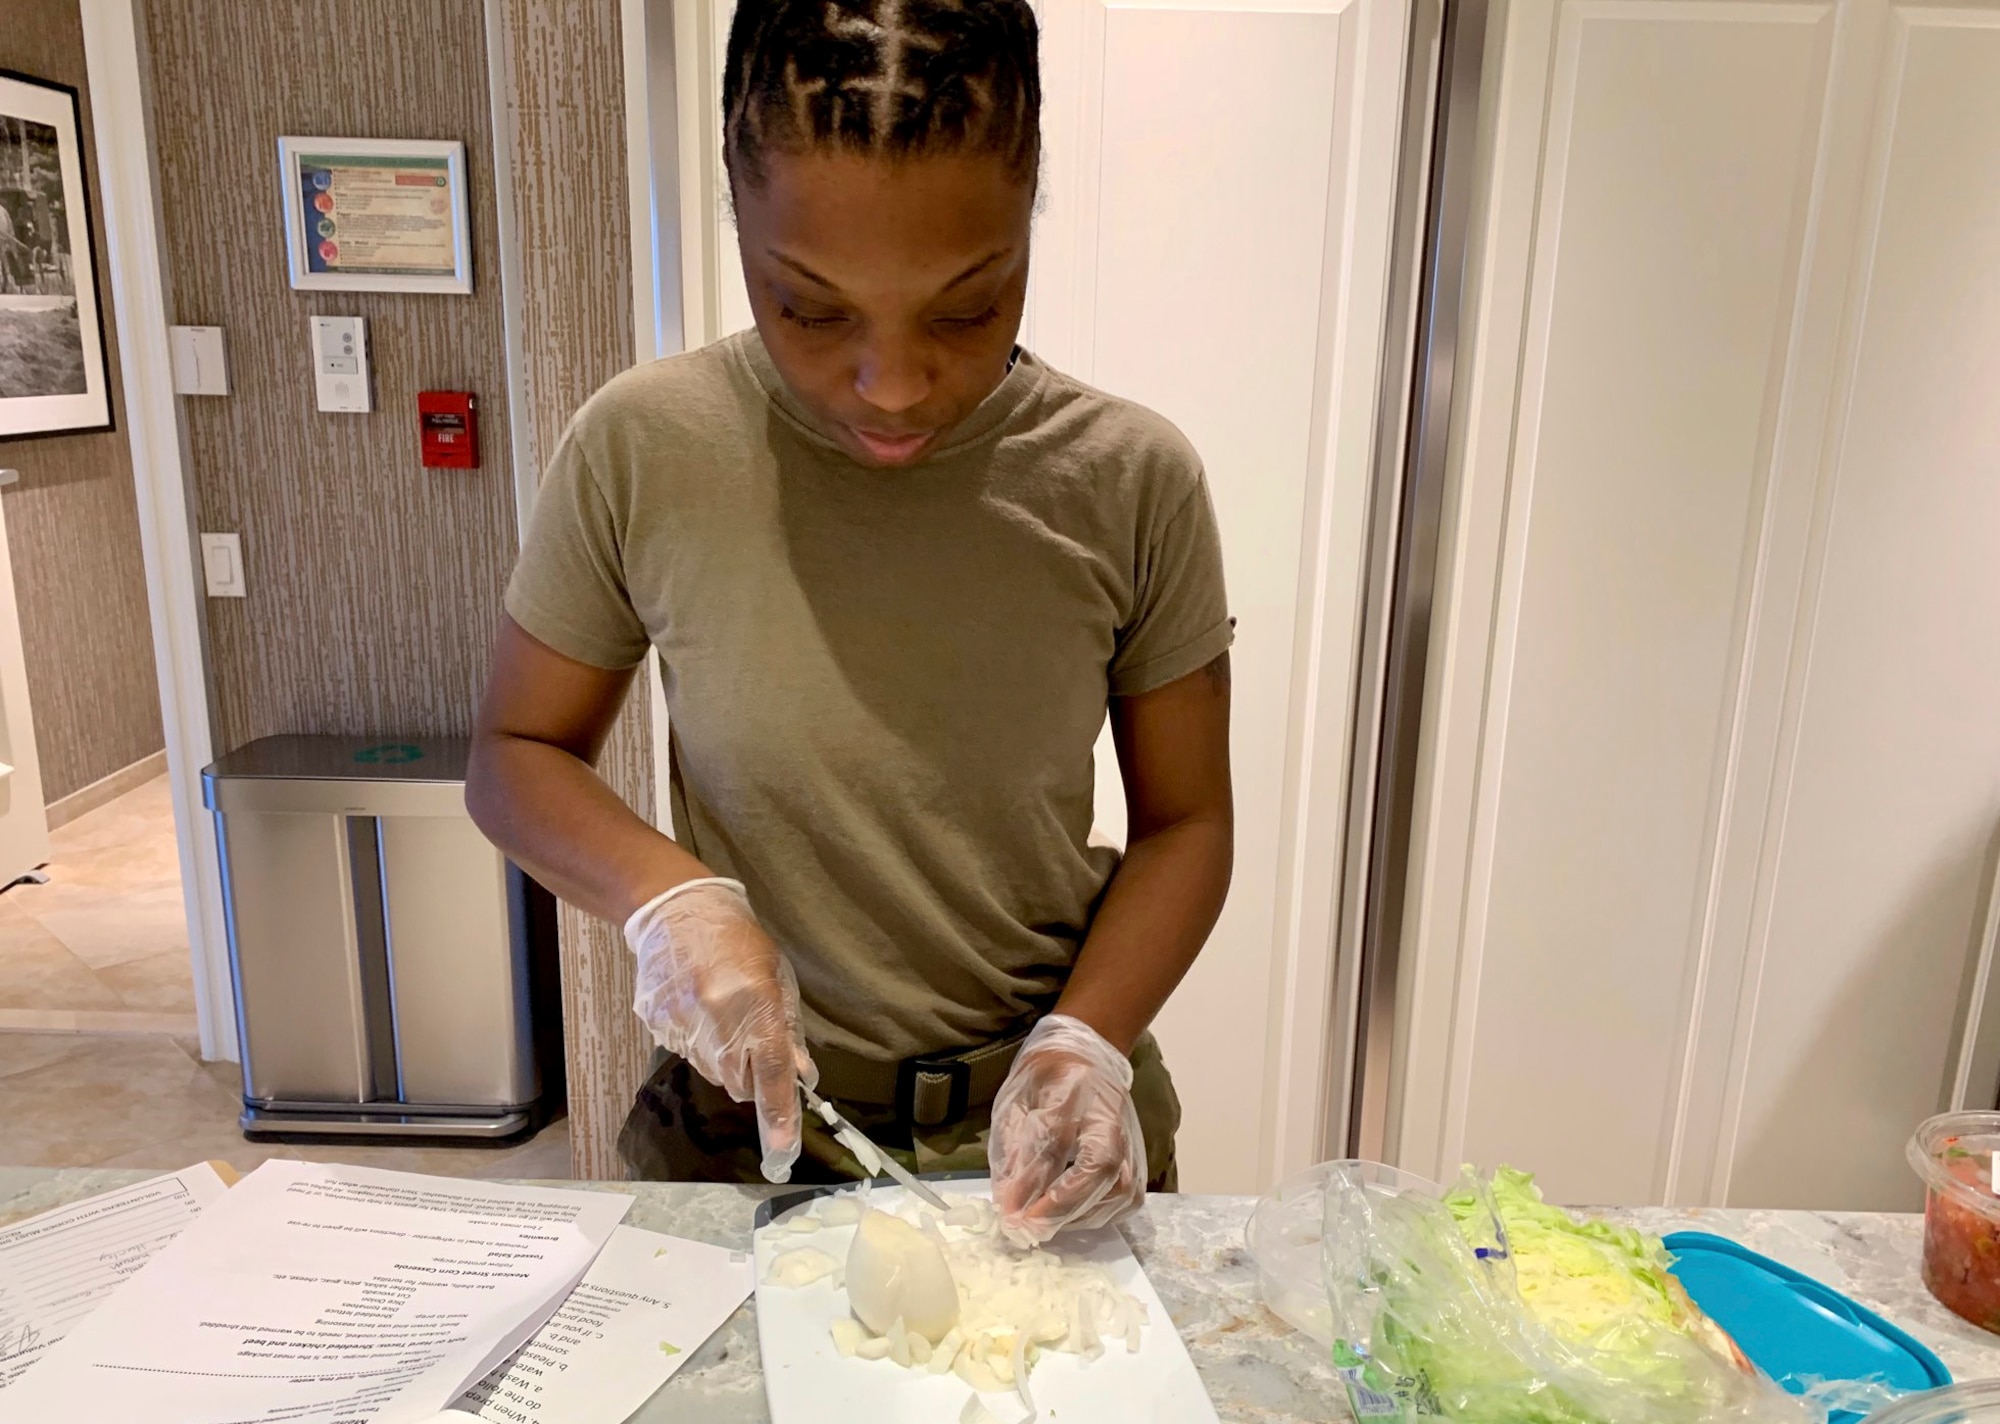 Senior Airman Miyae Franklin, Geospatial Intelligence Analysis Squadron member, prepares a meal to serve at the Veterans Administration Medical Center Fisher House in Dayton, Ohio on Feb. 20, 2020. During the volunteer event, six members of the Geospatial Intelligence Analysis Squadron bought, prepared and cooked meals for veterans located at the medical center. (U.S. Air Force photo/Courtesy)